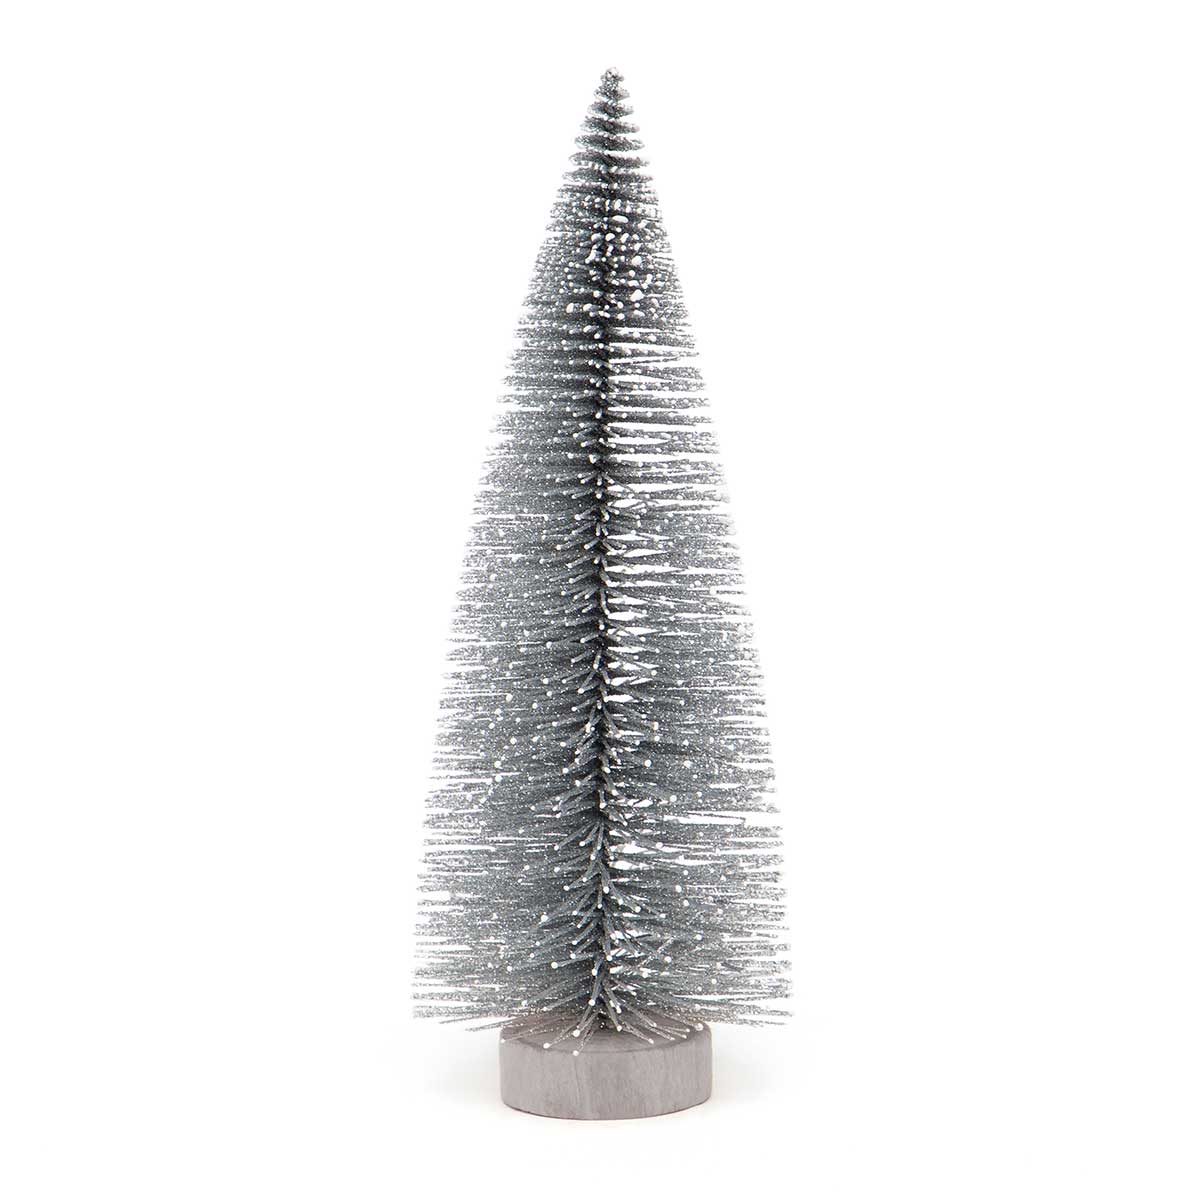 !BRISTLE TREE SILVER WITH SNOWY TIPS, GLITTER AND WOOD BASE LARG